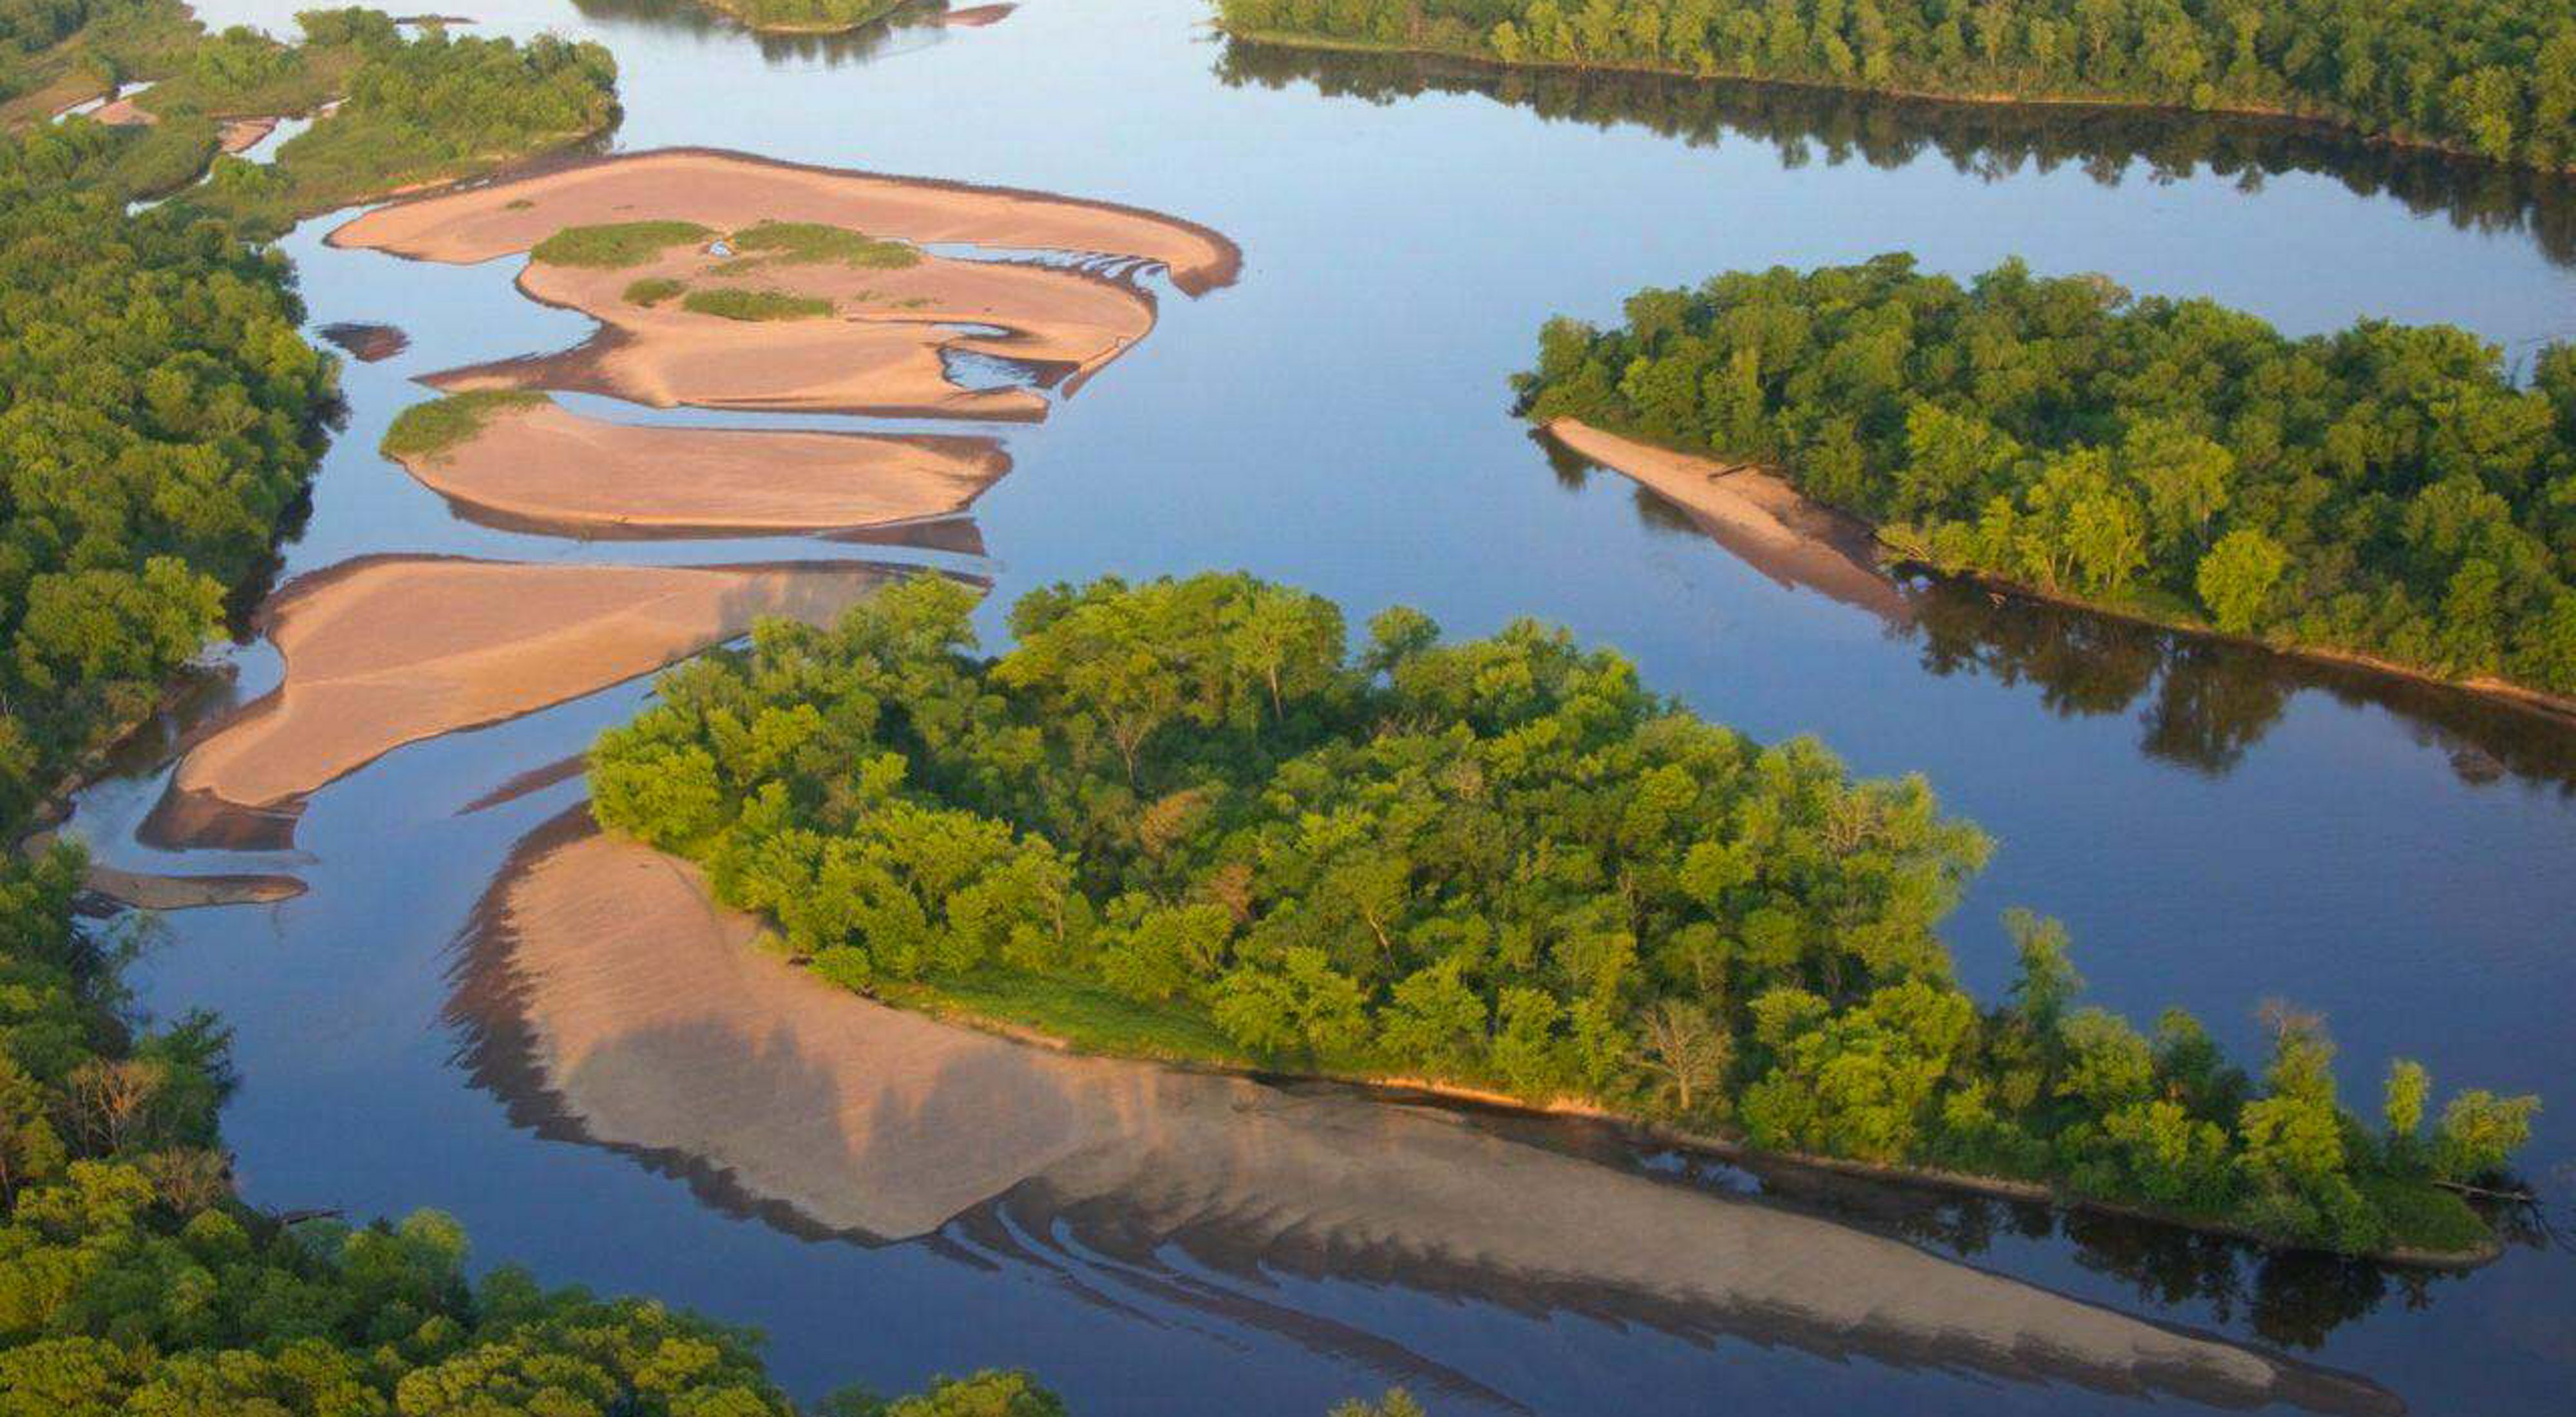 An aerial view of sandbars and islands in the Wisconsin River valley.